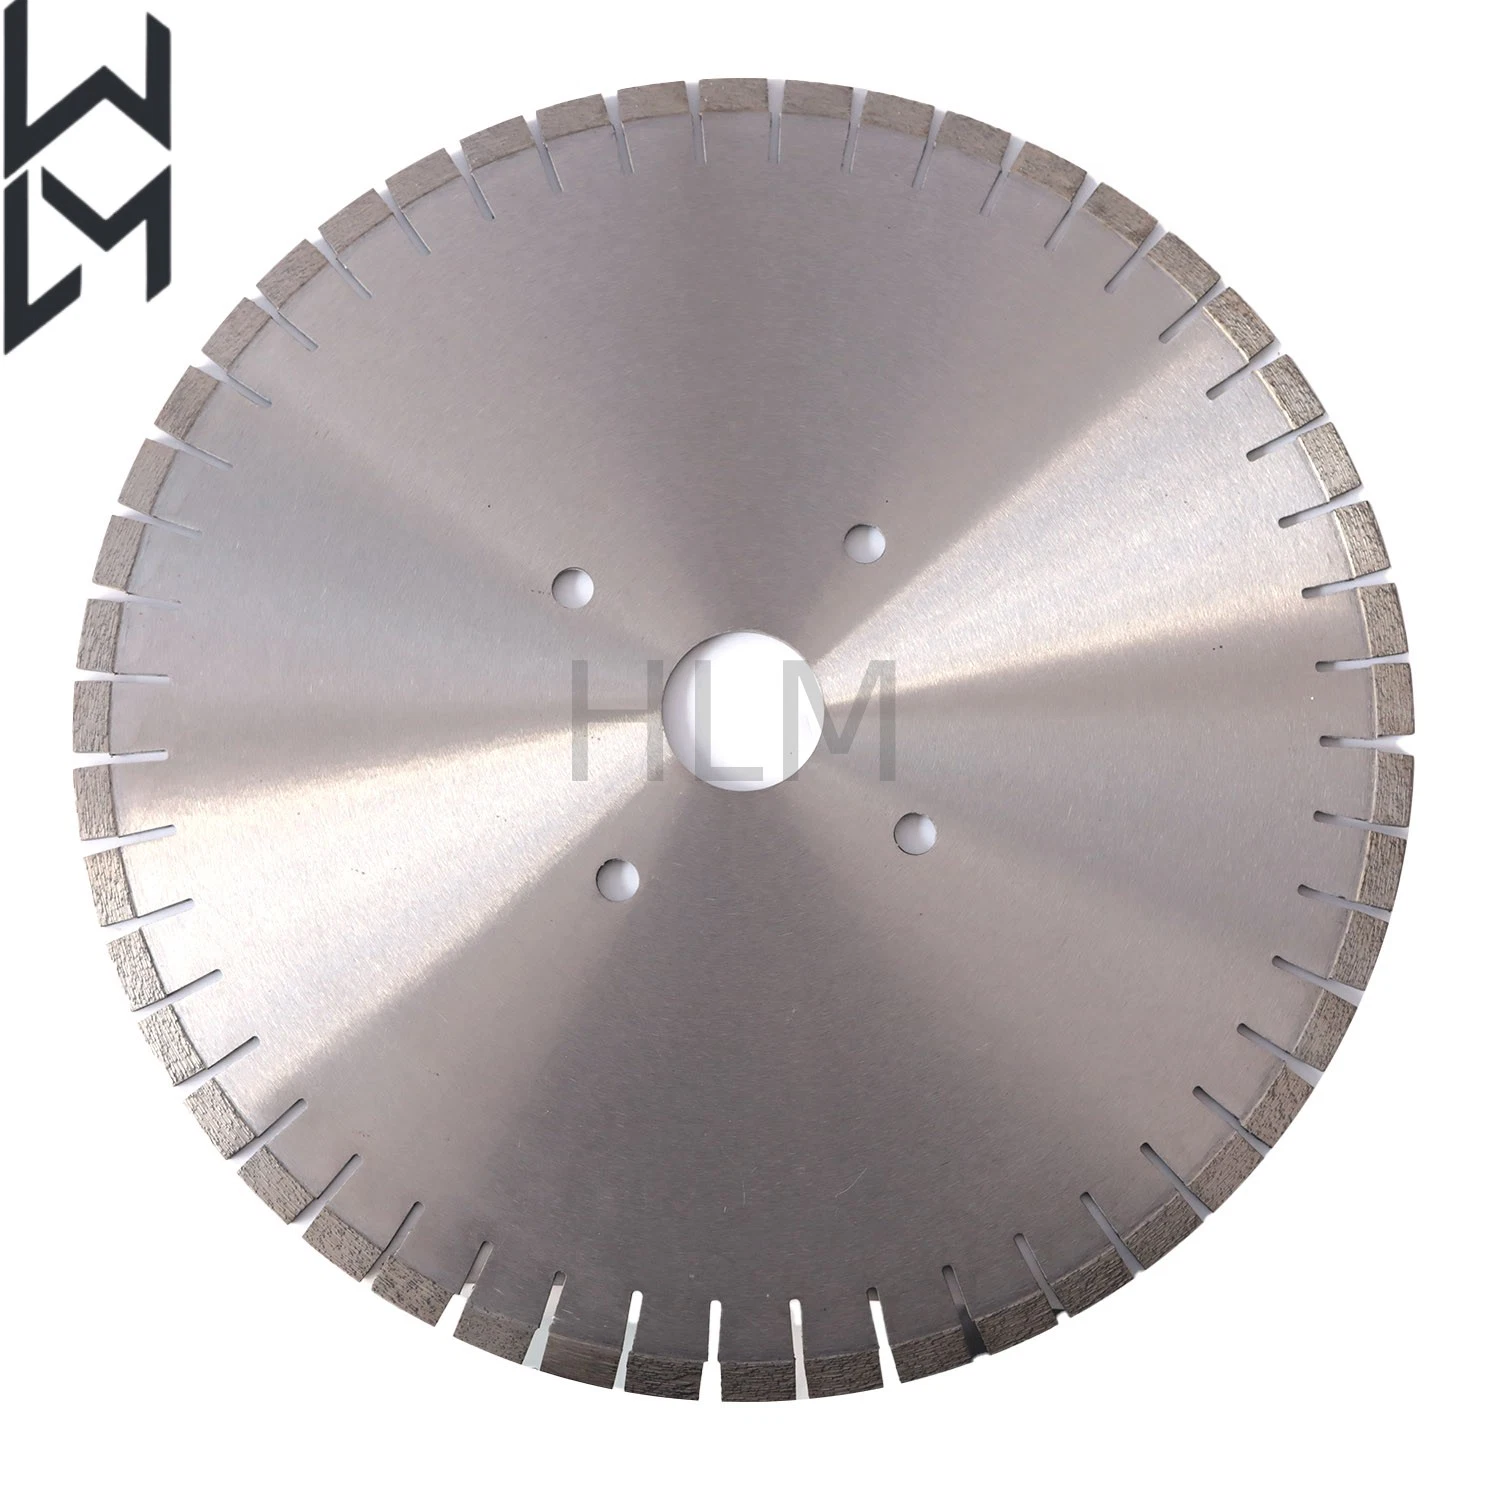 Laser Welded Multitooth Diamond Cutting Saw Blade for Granite, Marble, Concrete Stone Wet/Dry Cutting